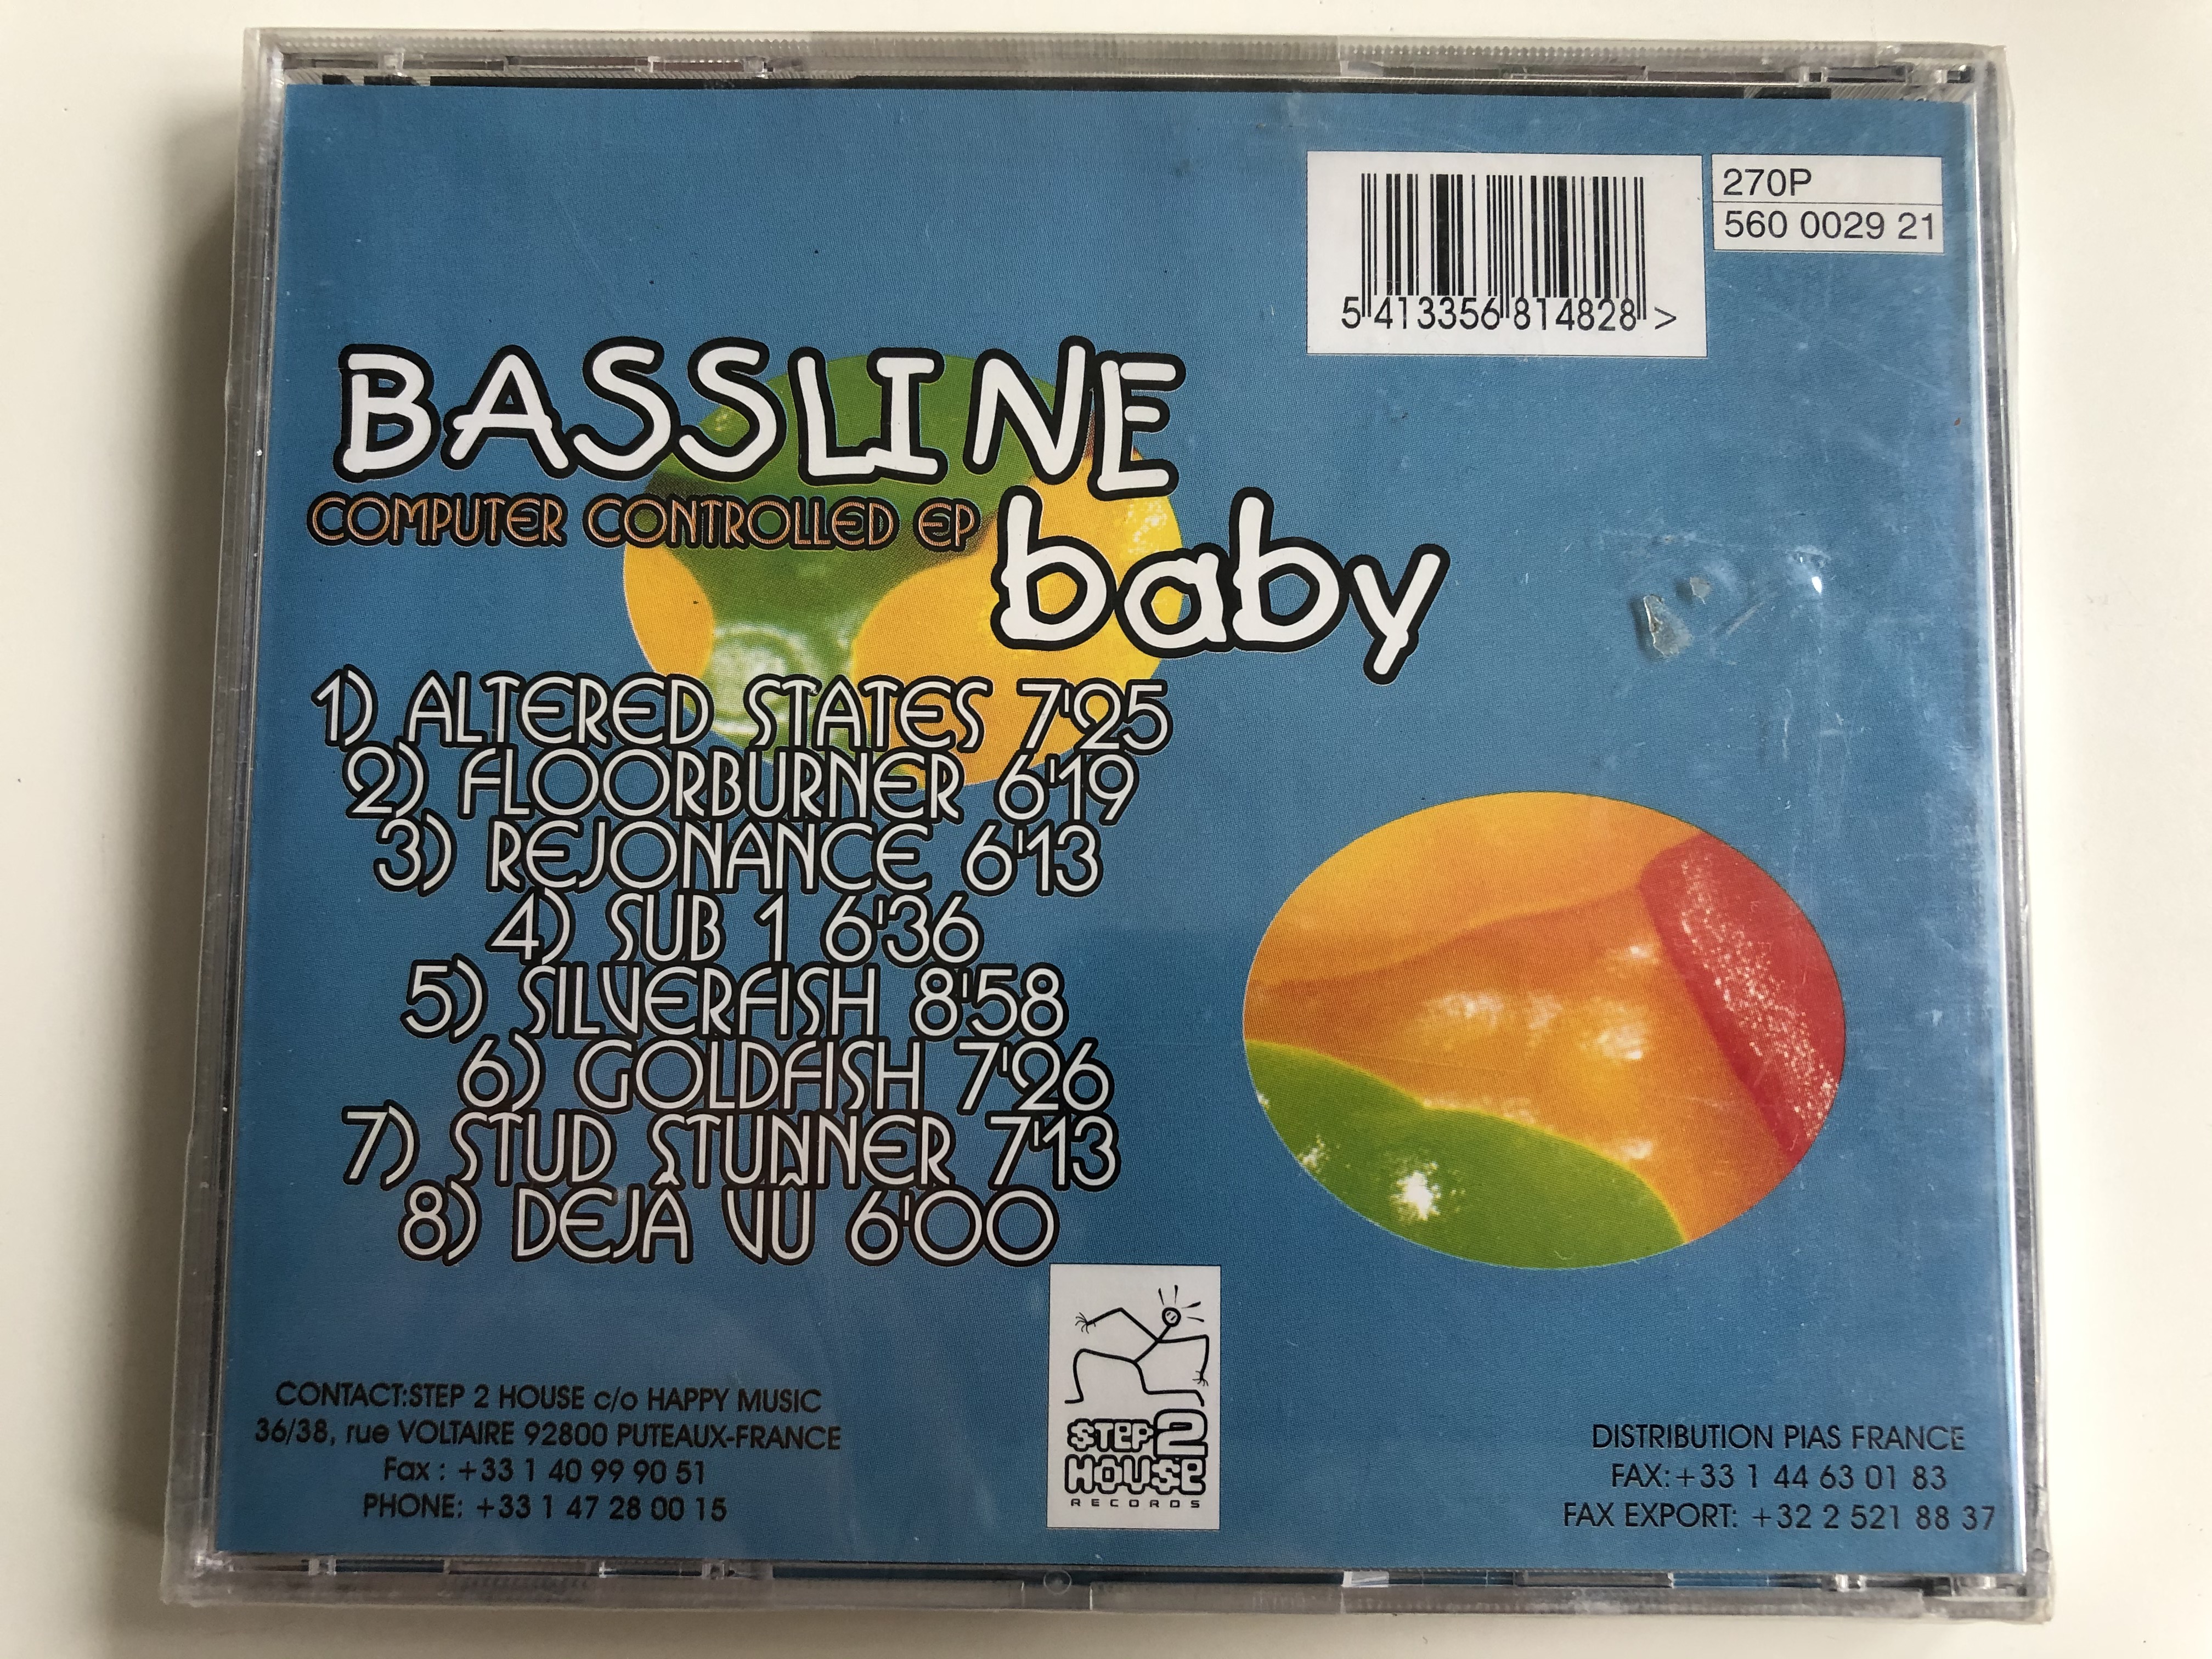 computer-controlled-ep-bassline-baby-step-2-house-records-audio-cd-560-0029-21-2-.jpg